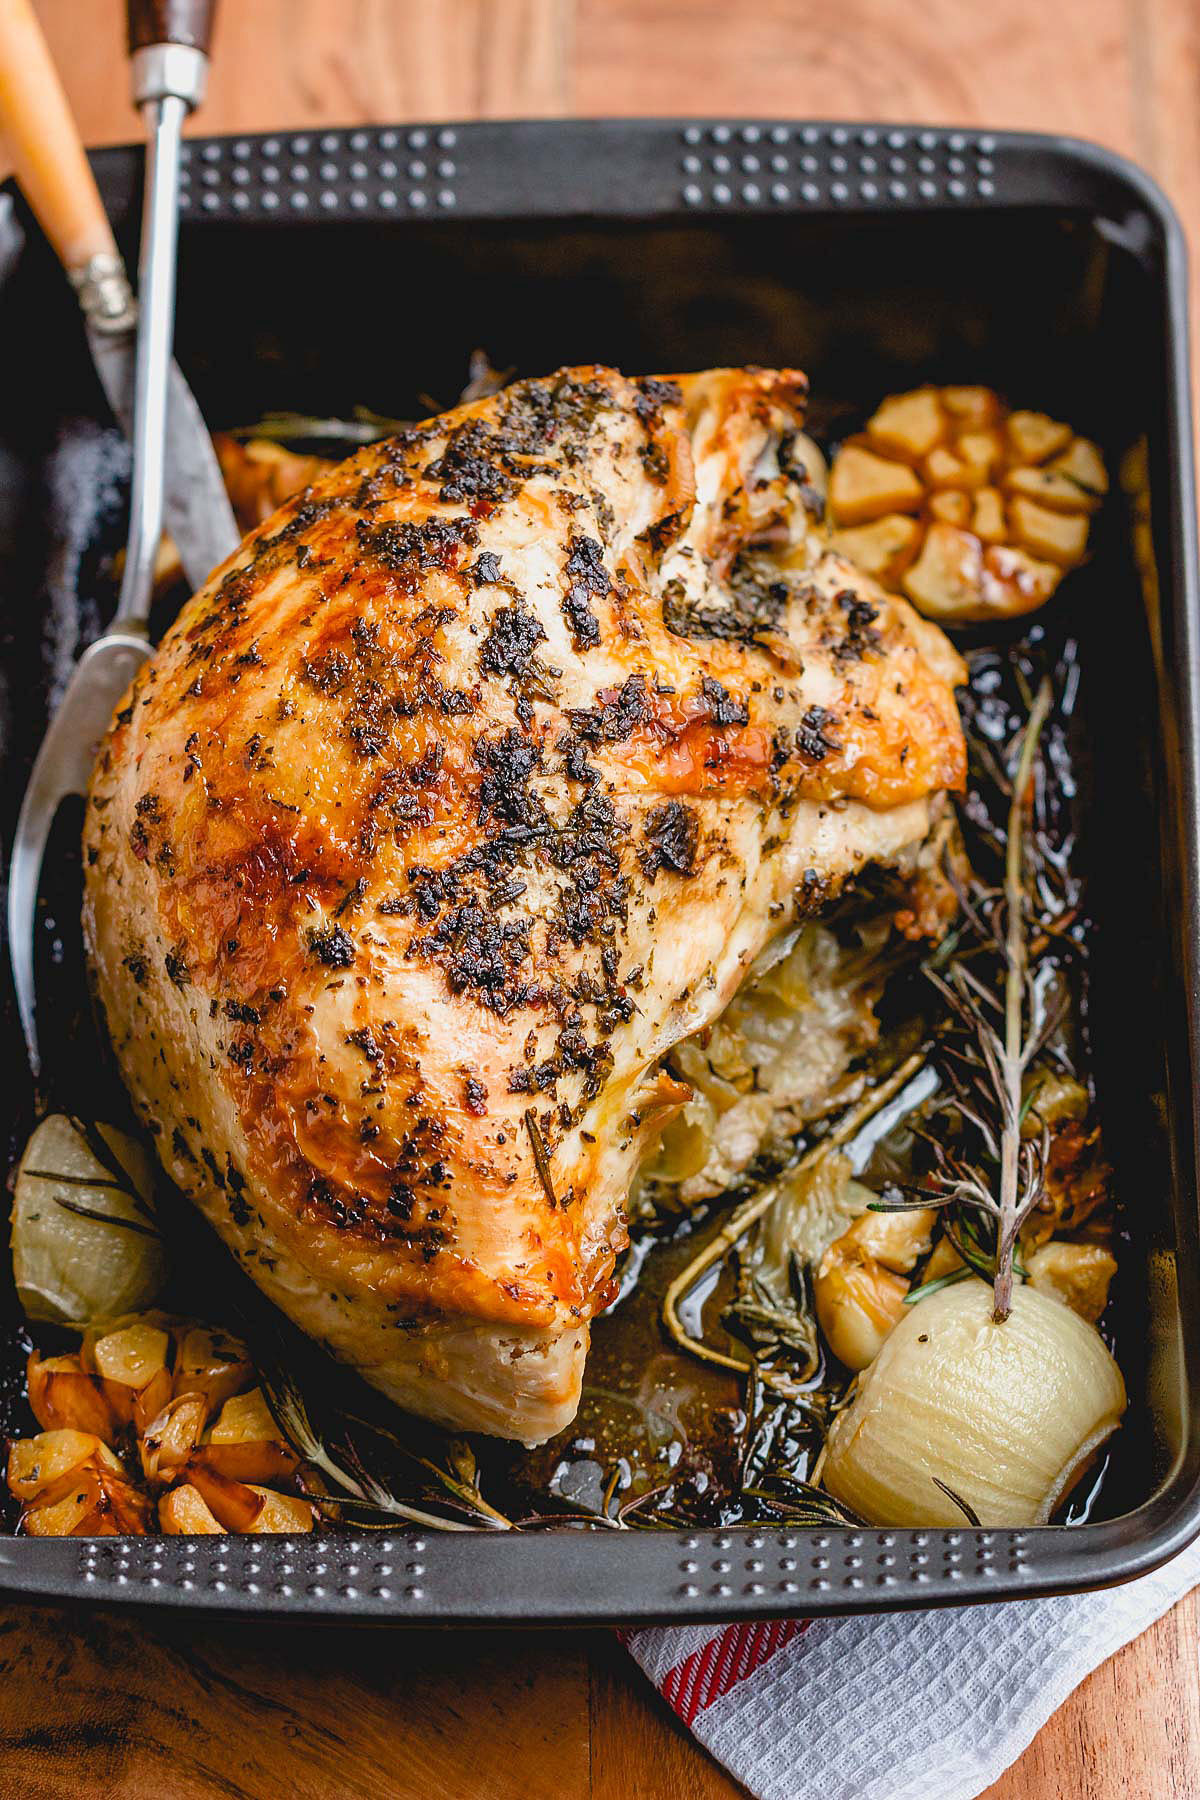 Turkey Breast Recipe For Thanksgiving
 Roasted Turkey Breast Recipe with Garlic Herb Butter